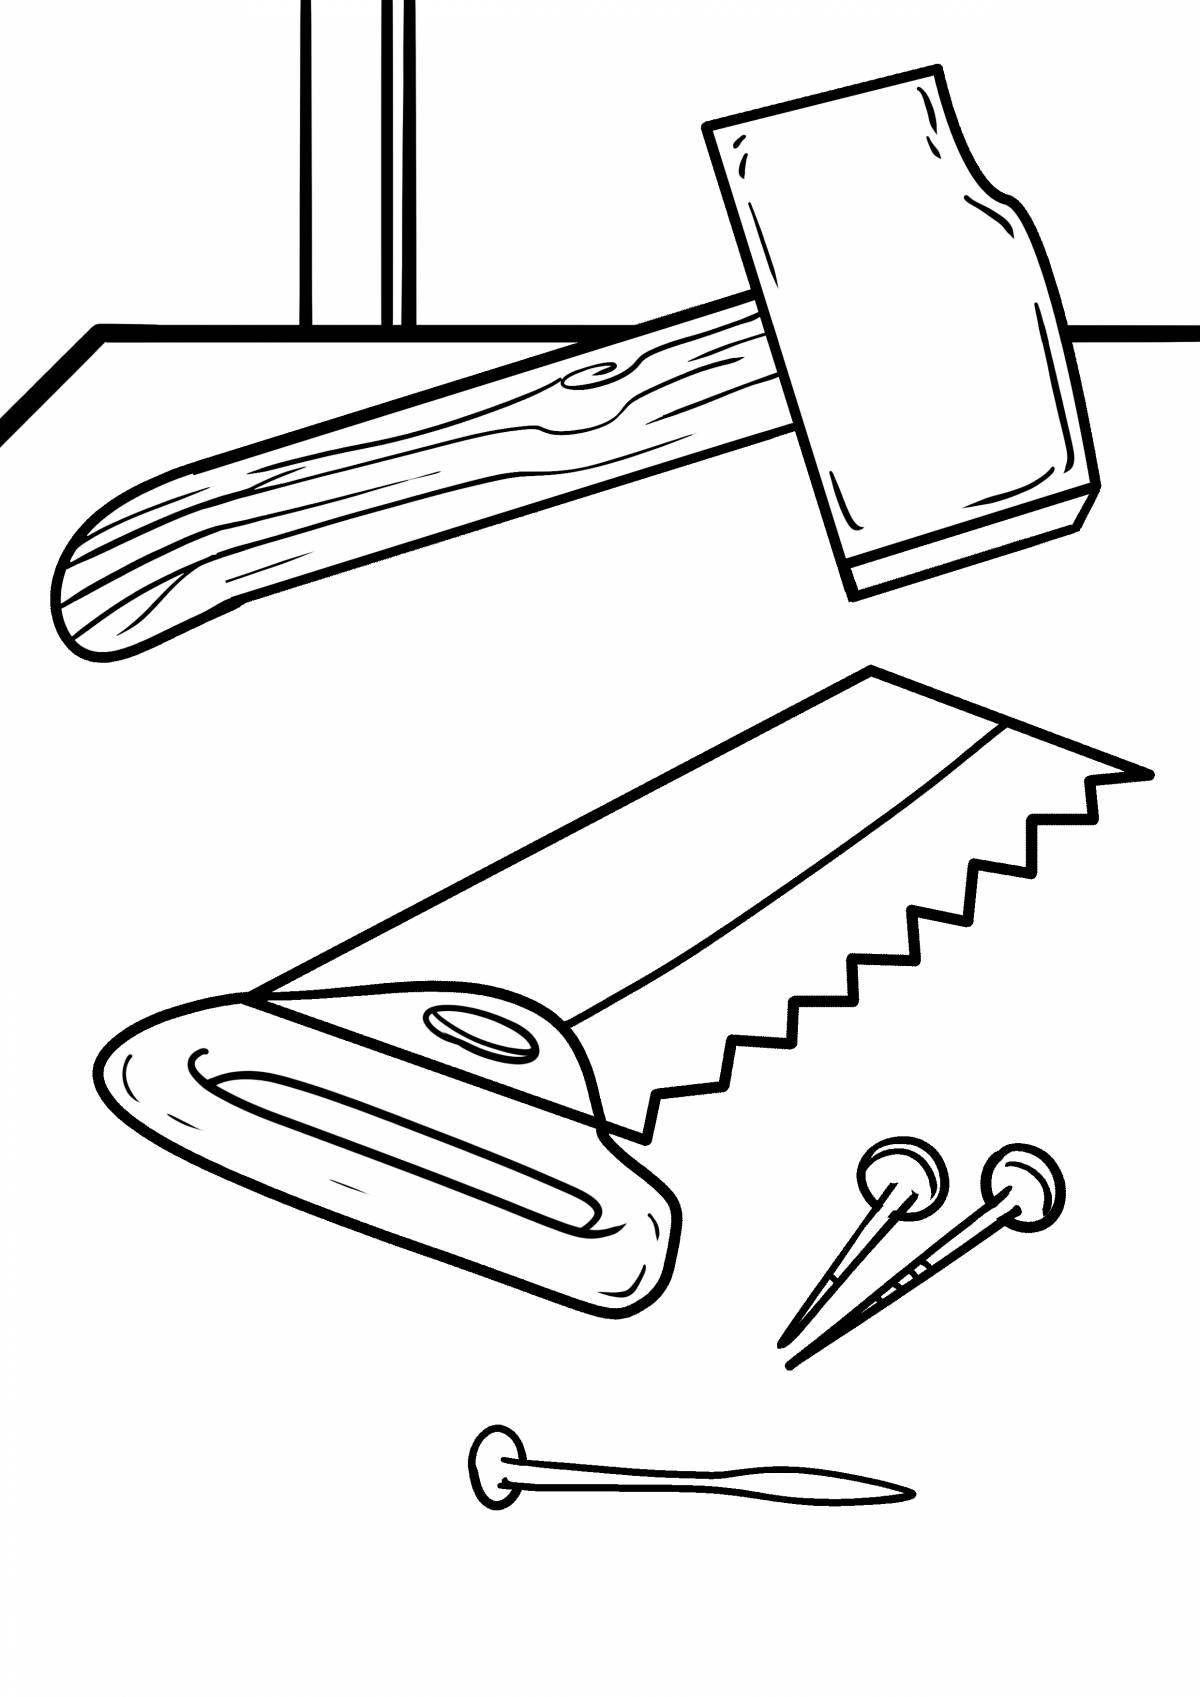 Stimulating coloring pages for preschoolers